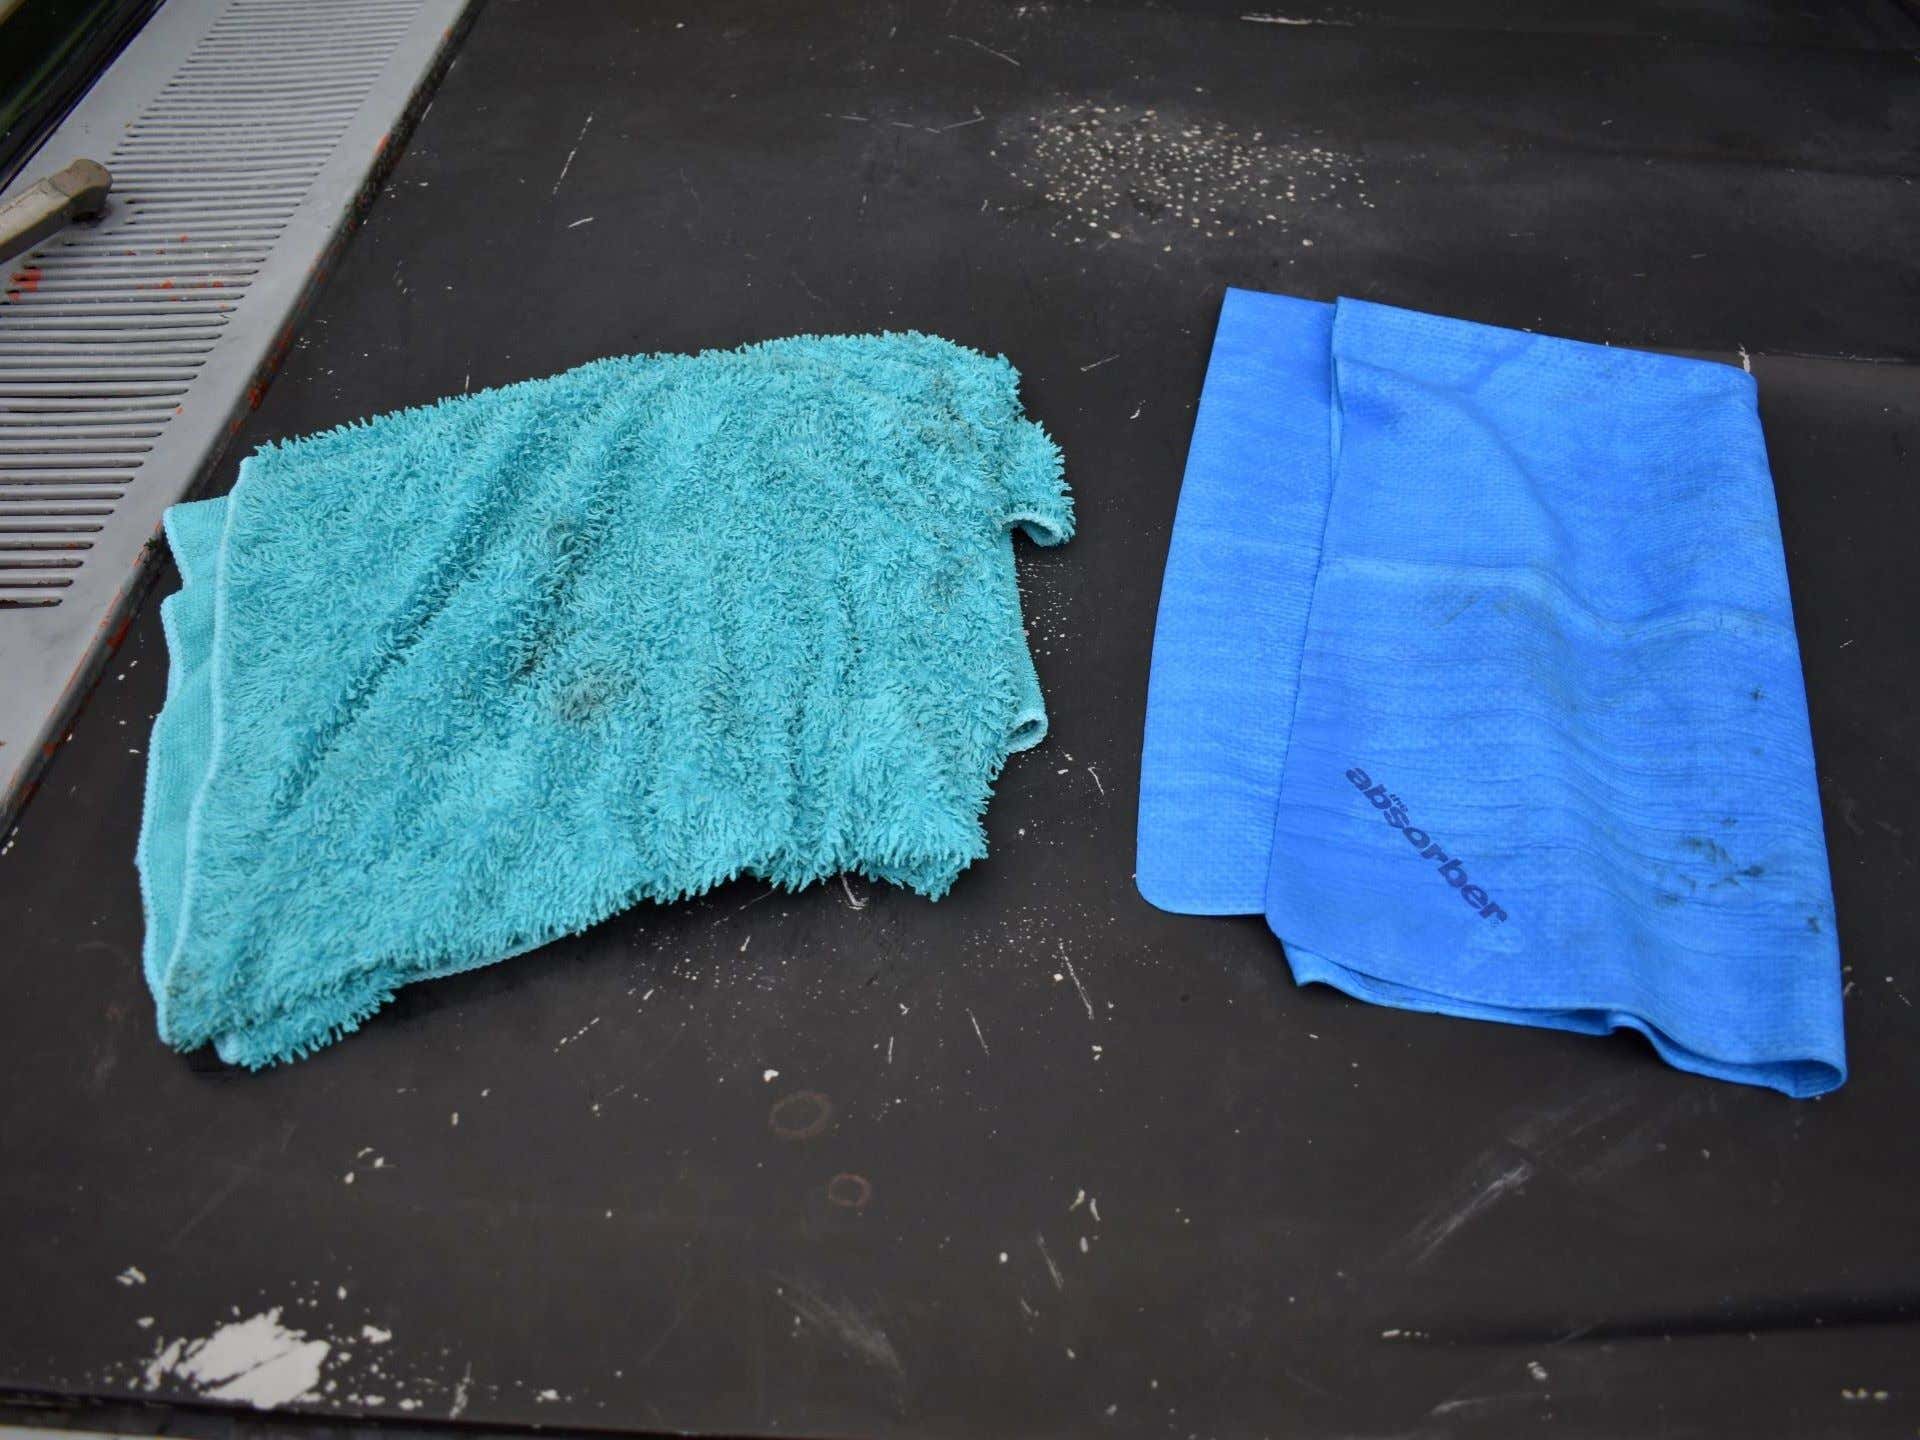 A microfiber towel on the left compared to a blue Absorber chamois on the right.